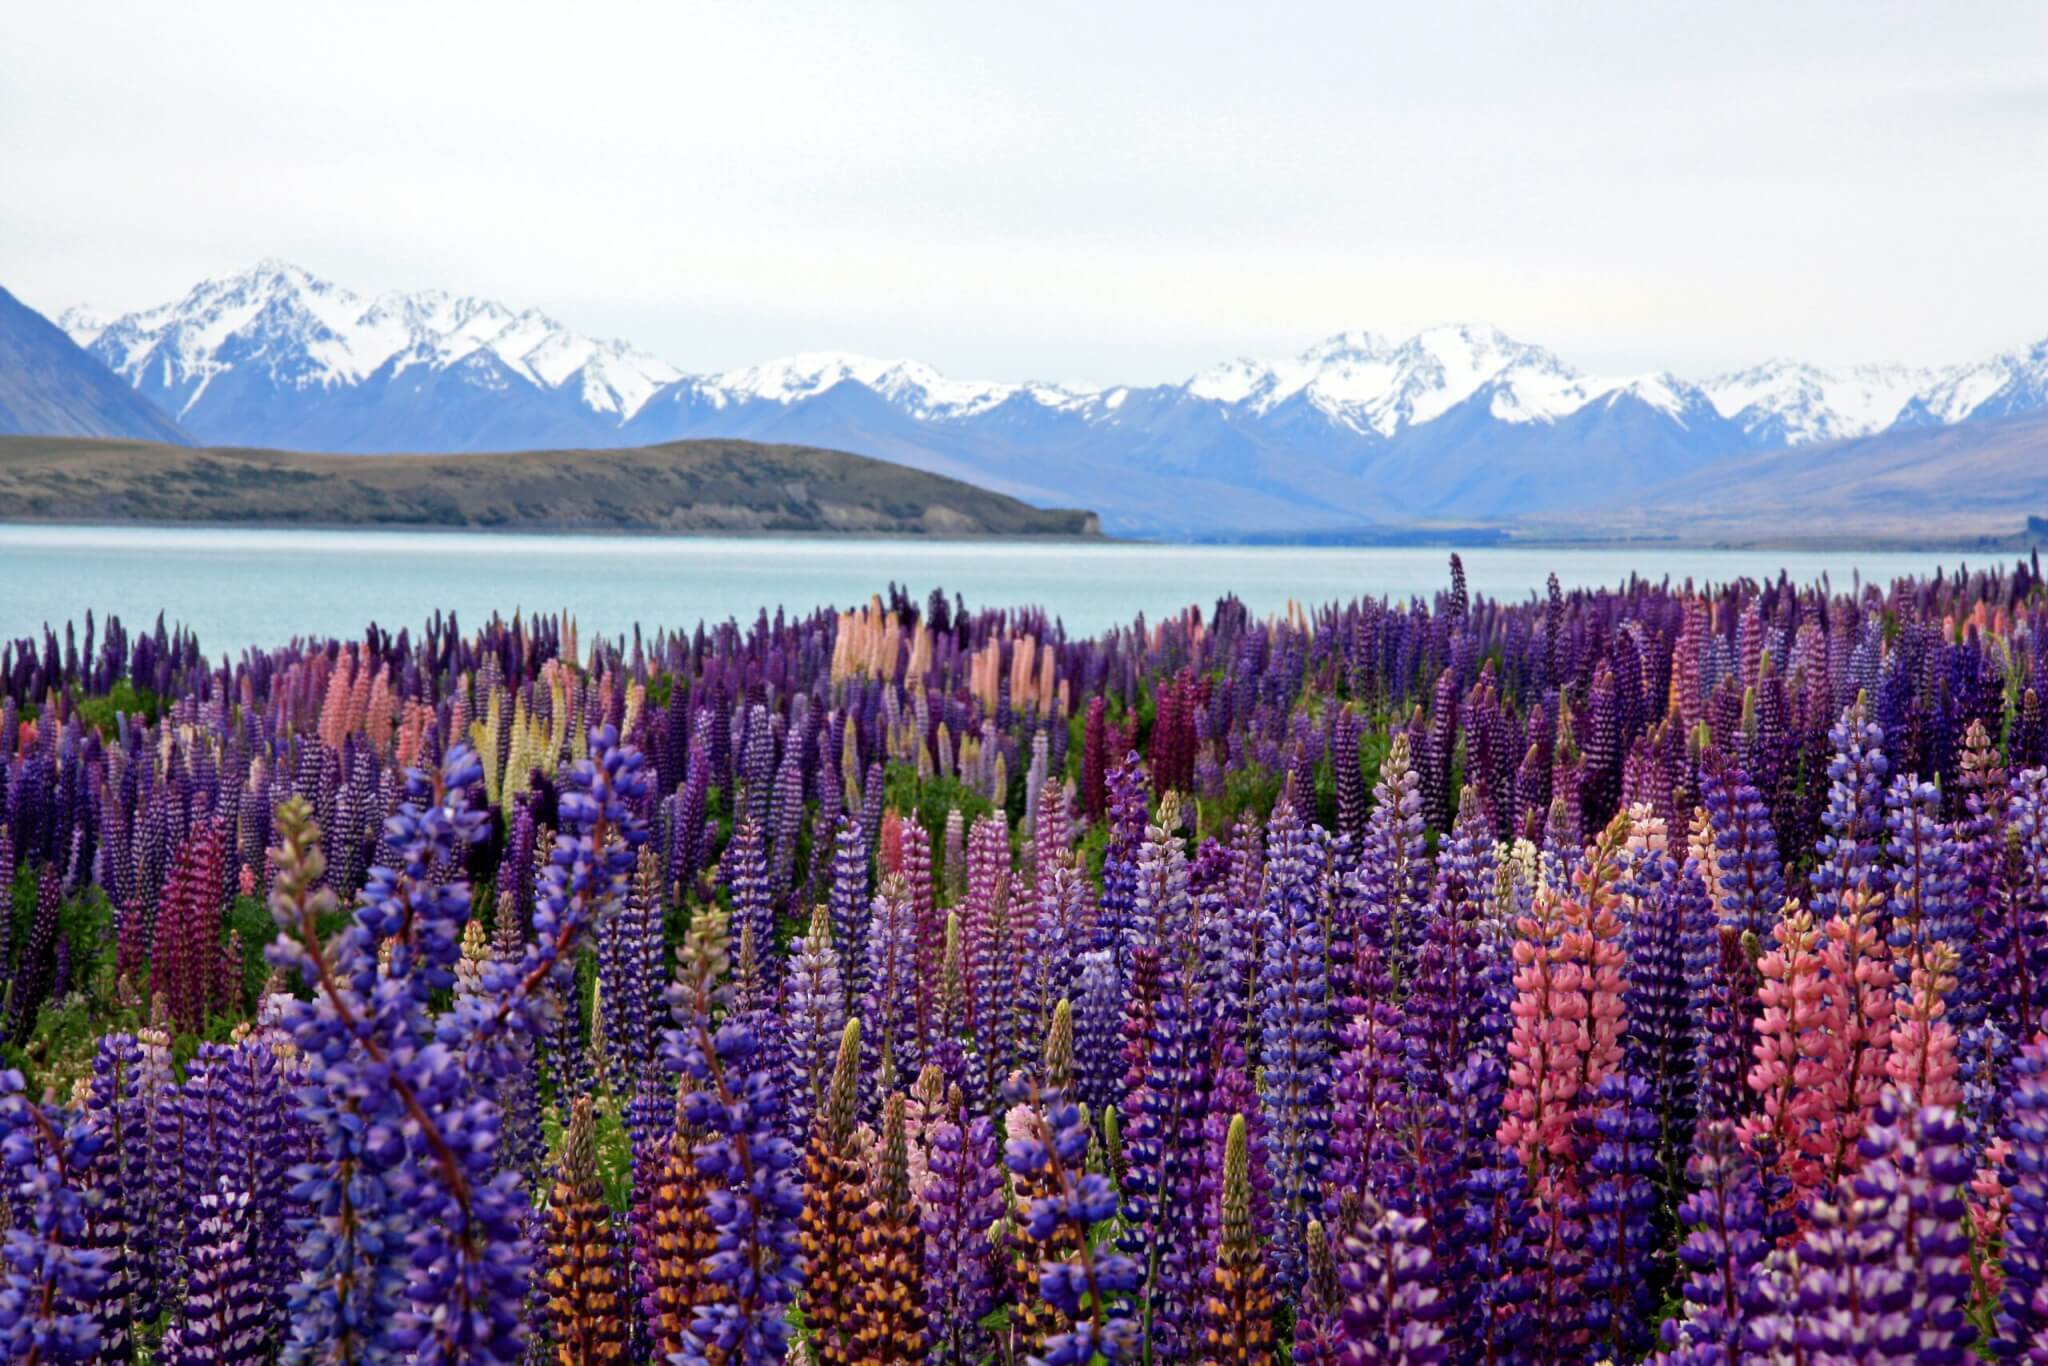 Colorful lupins put on a brilliant display on the shore of Lake Tekapo.